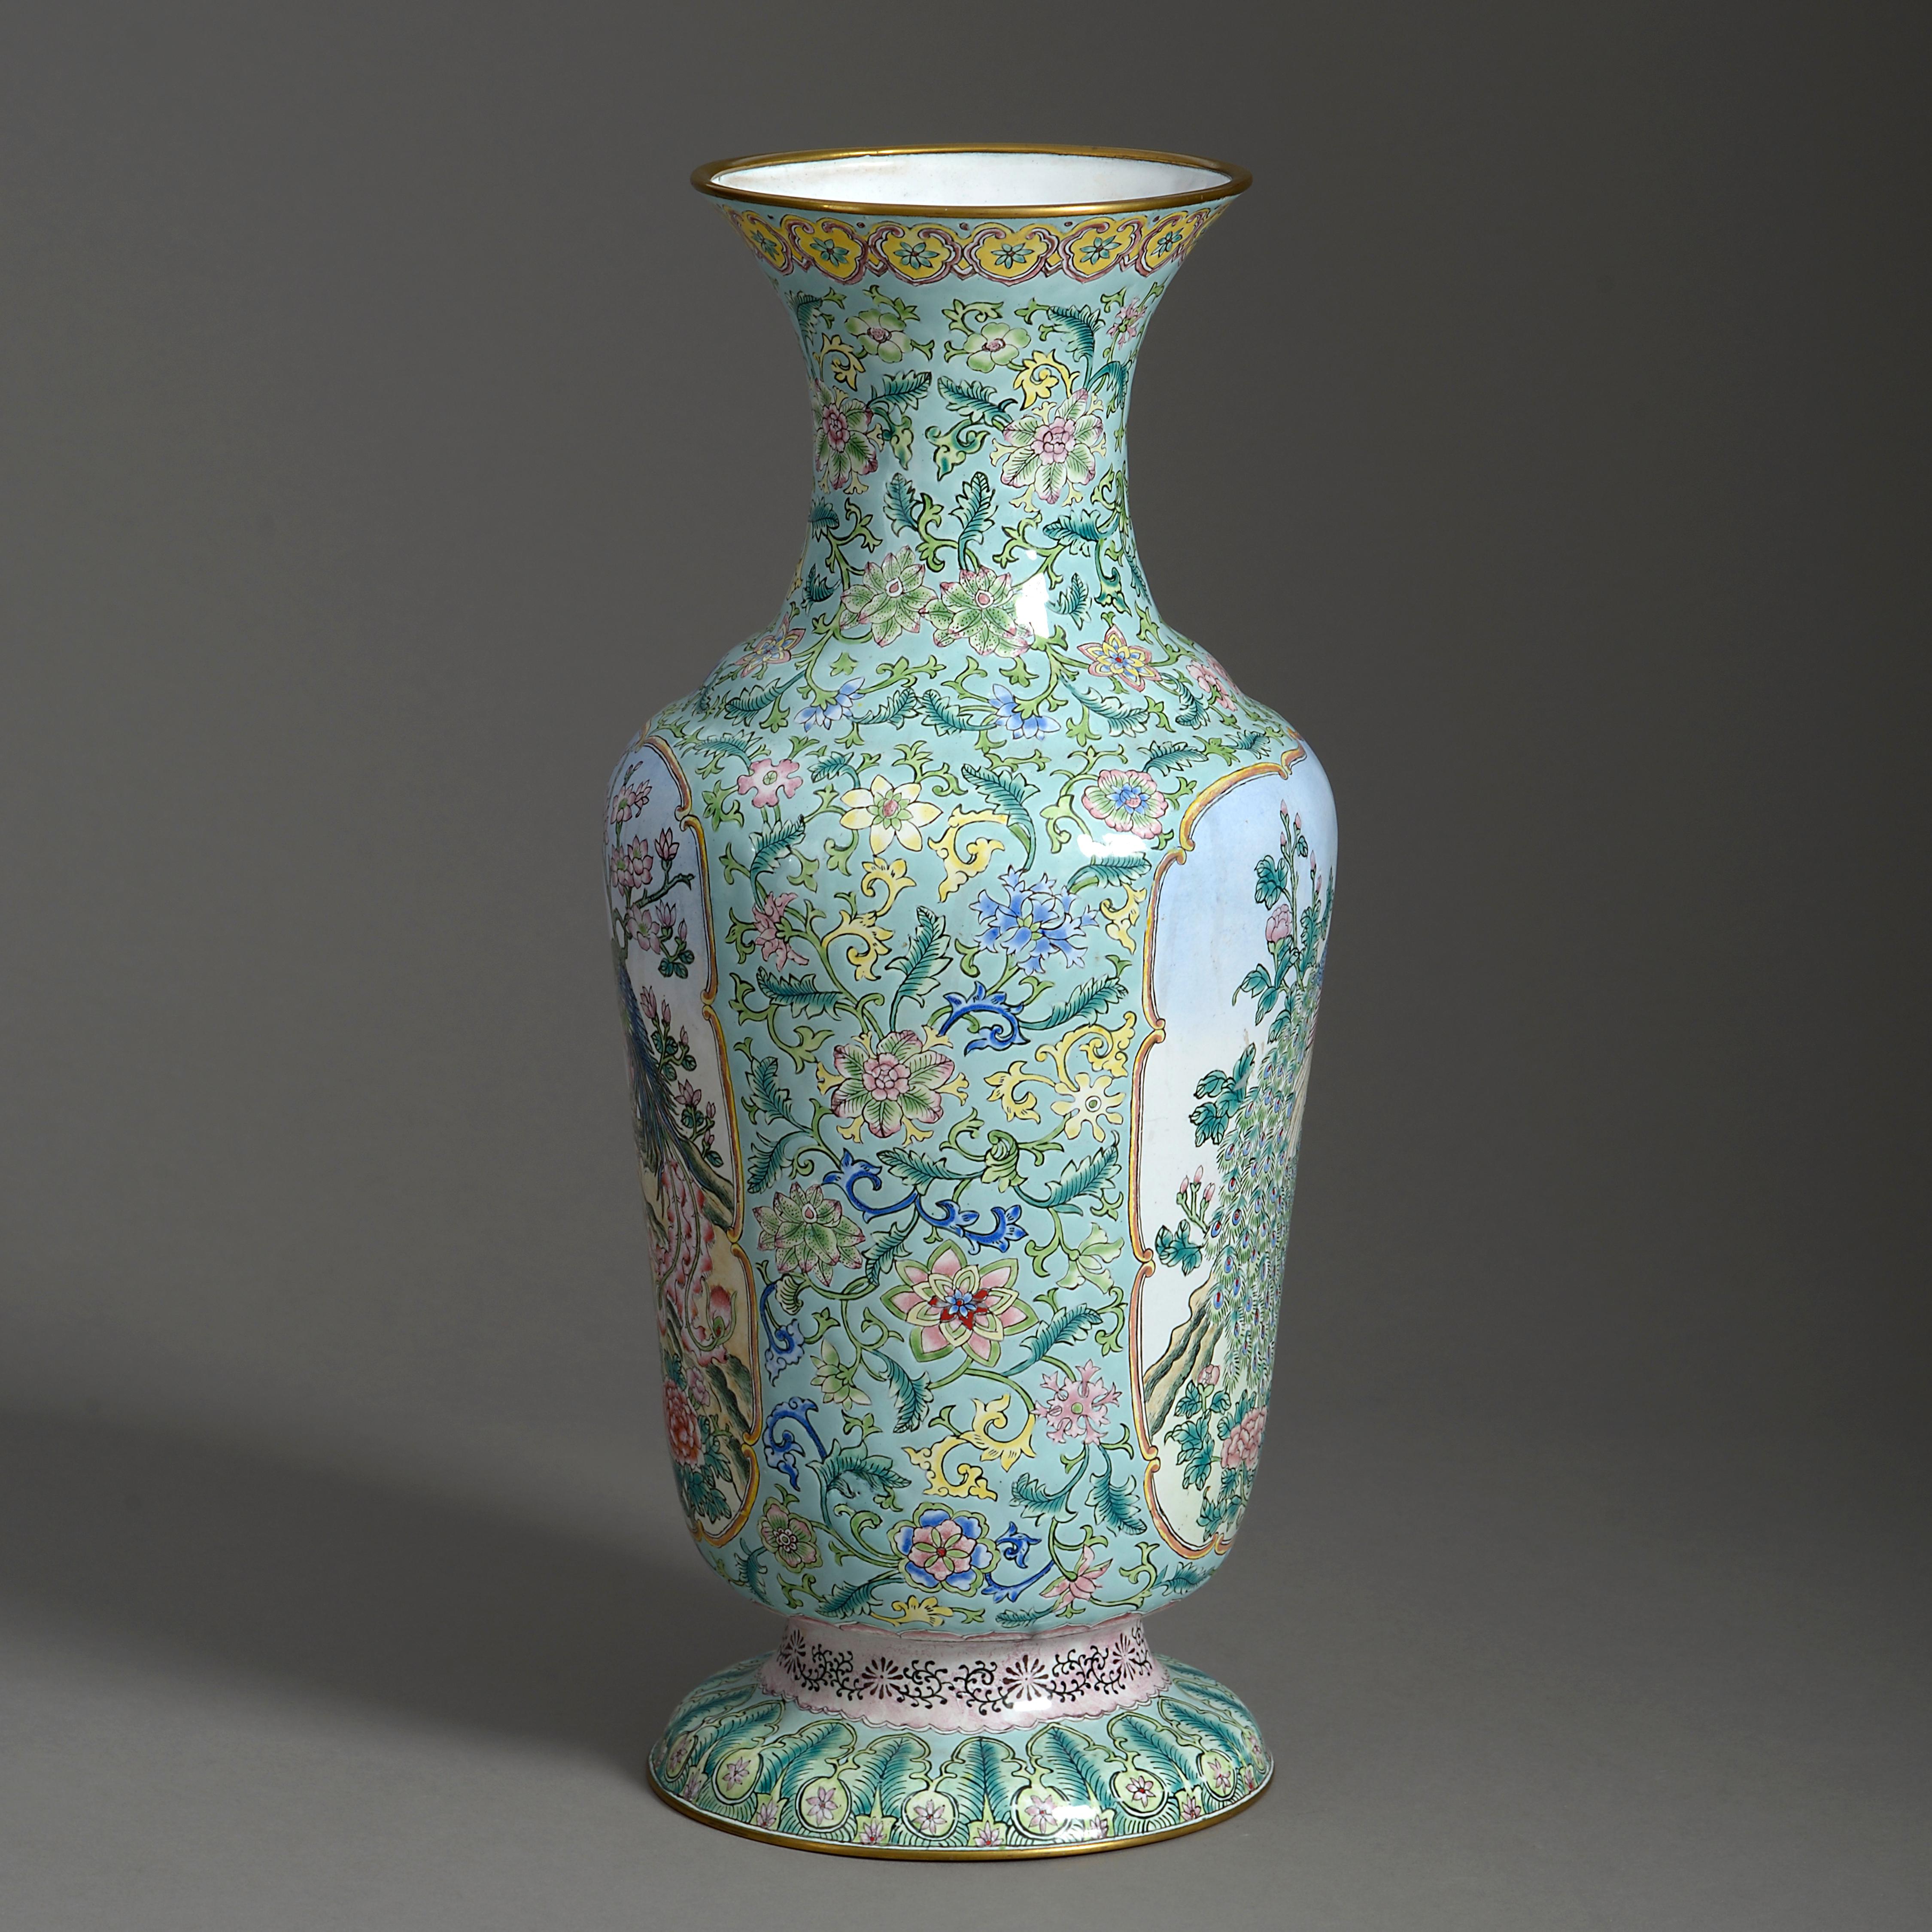 A mid-20th century republic period canton enamel vase of good scale, decorated in polychrome glazes with scrolling foliage upon a turquoise ground, the cartouches with stylised peacocks.

   